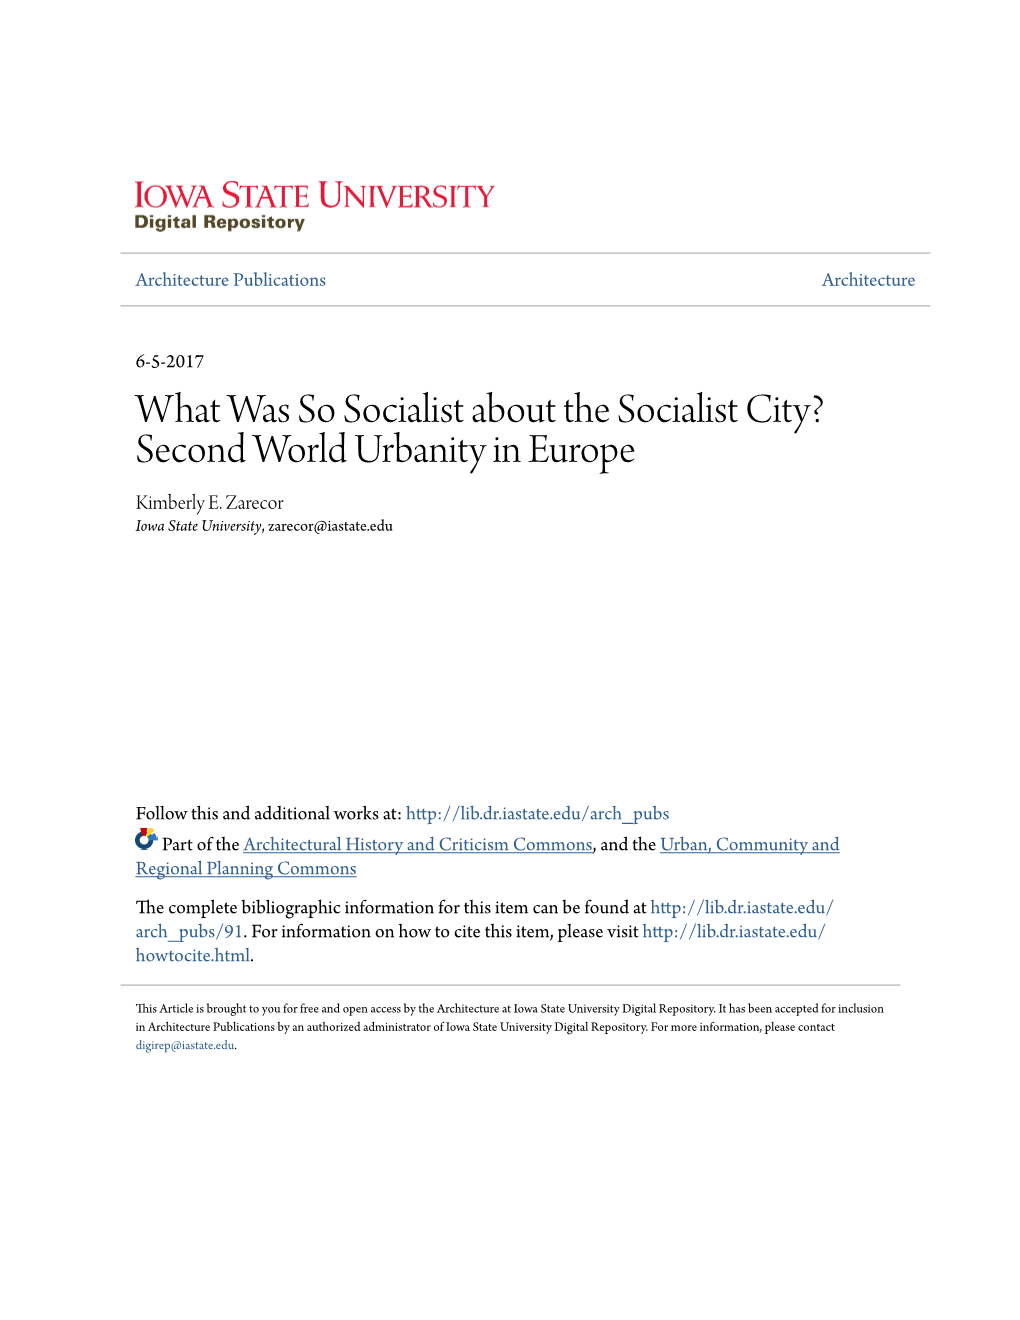 What Was So Socialist About the Socialist City? Second World Urbanity in Europe Kimberly E